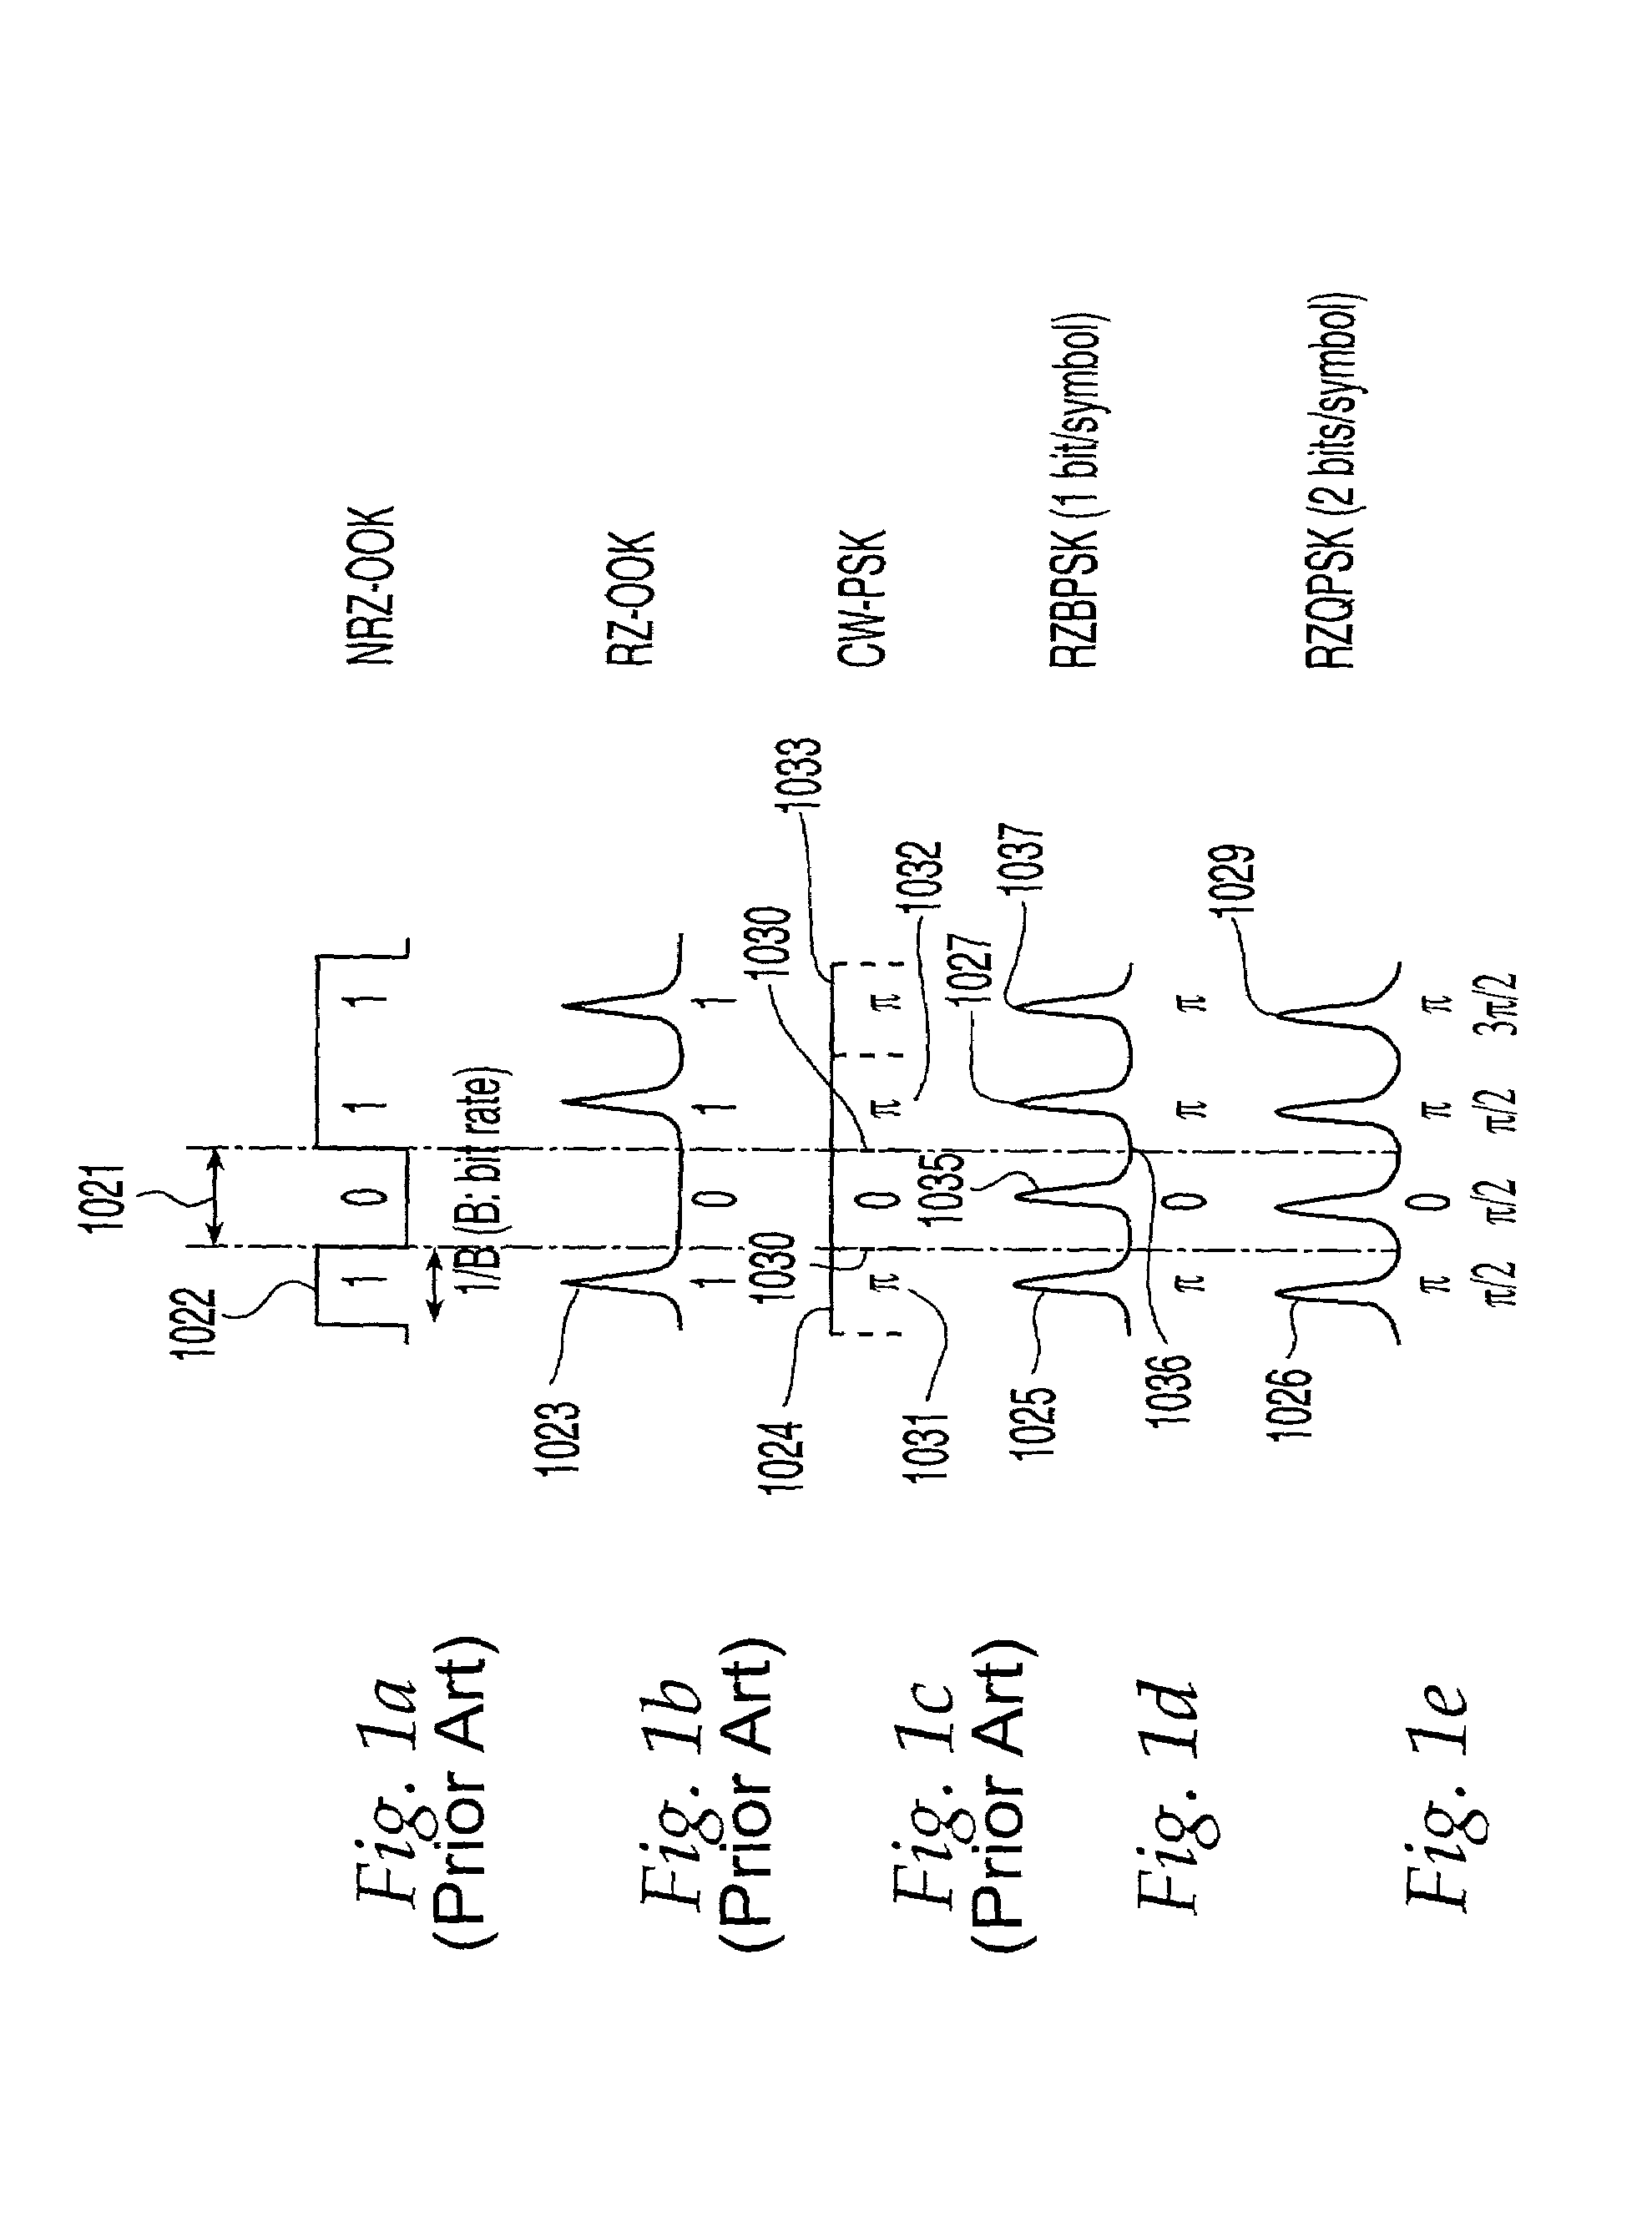 Method and system for mitigating nonlinear transmission impairments in fiber-optic communications systems